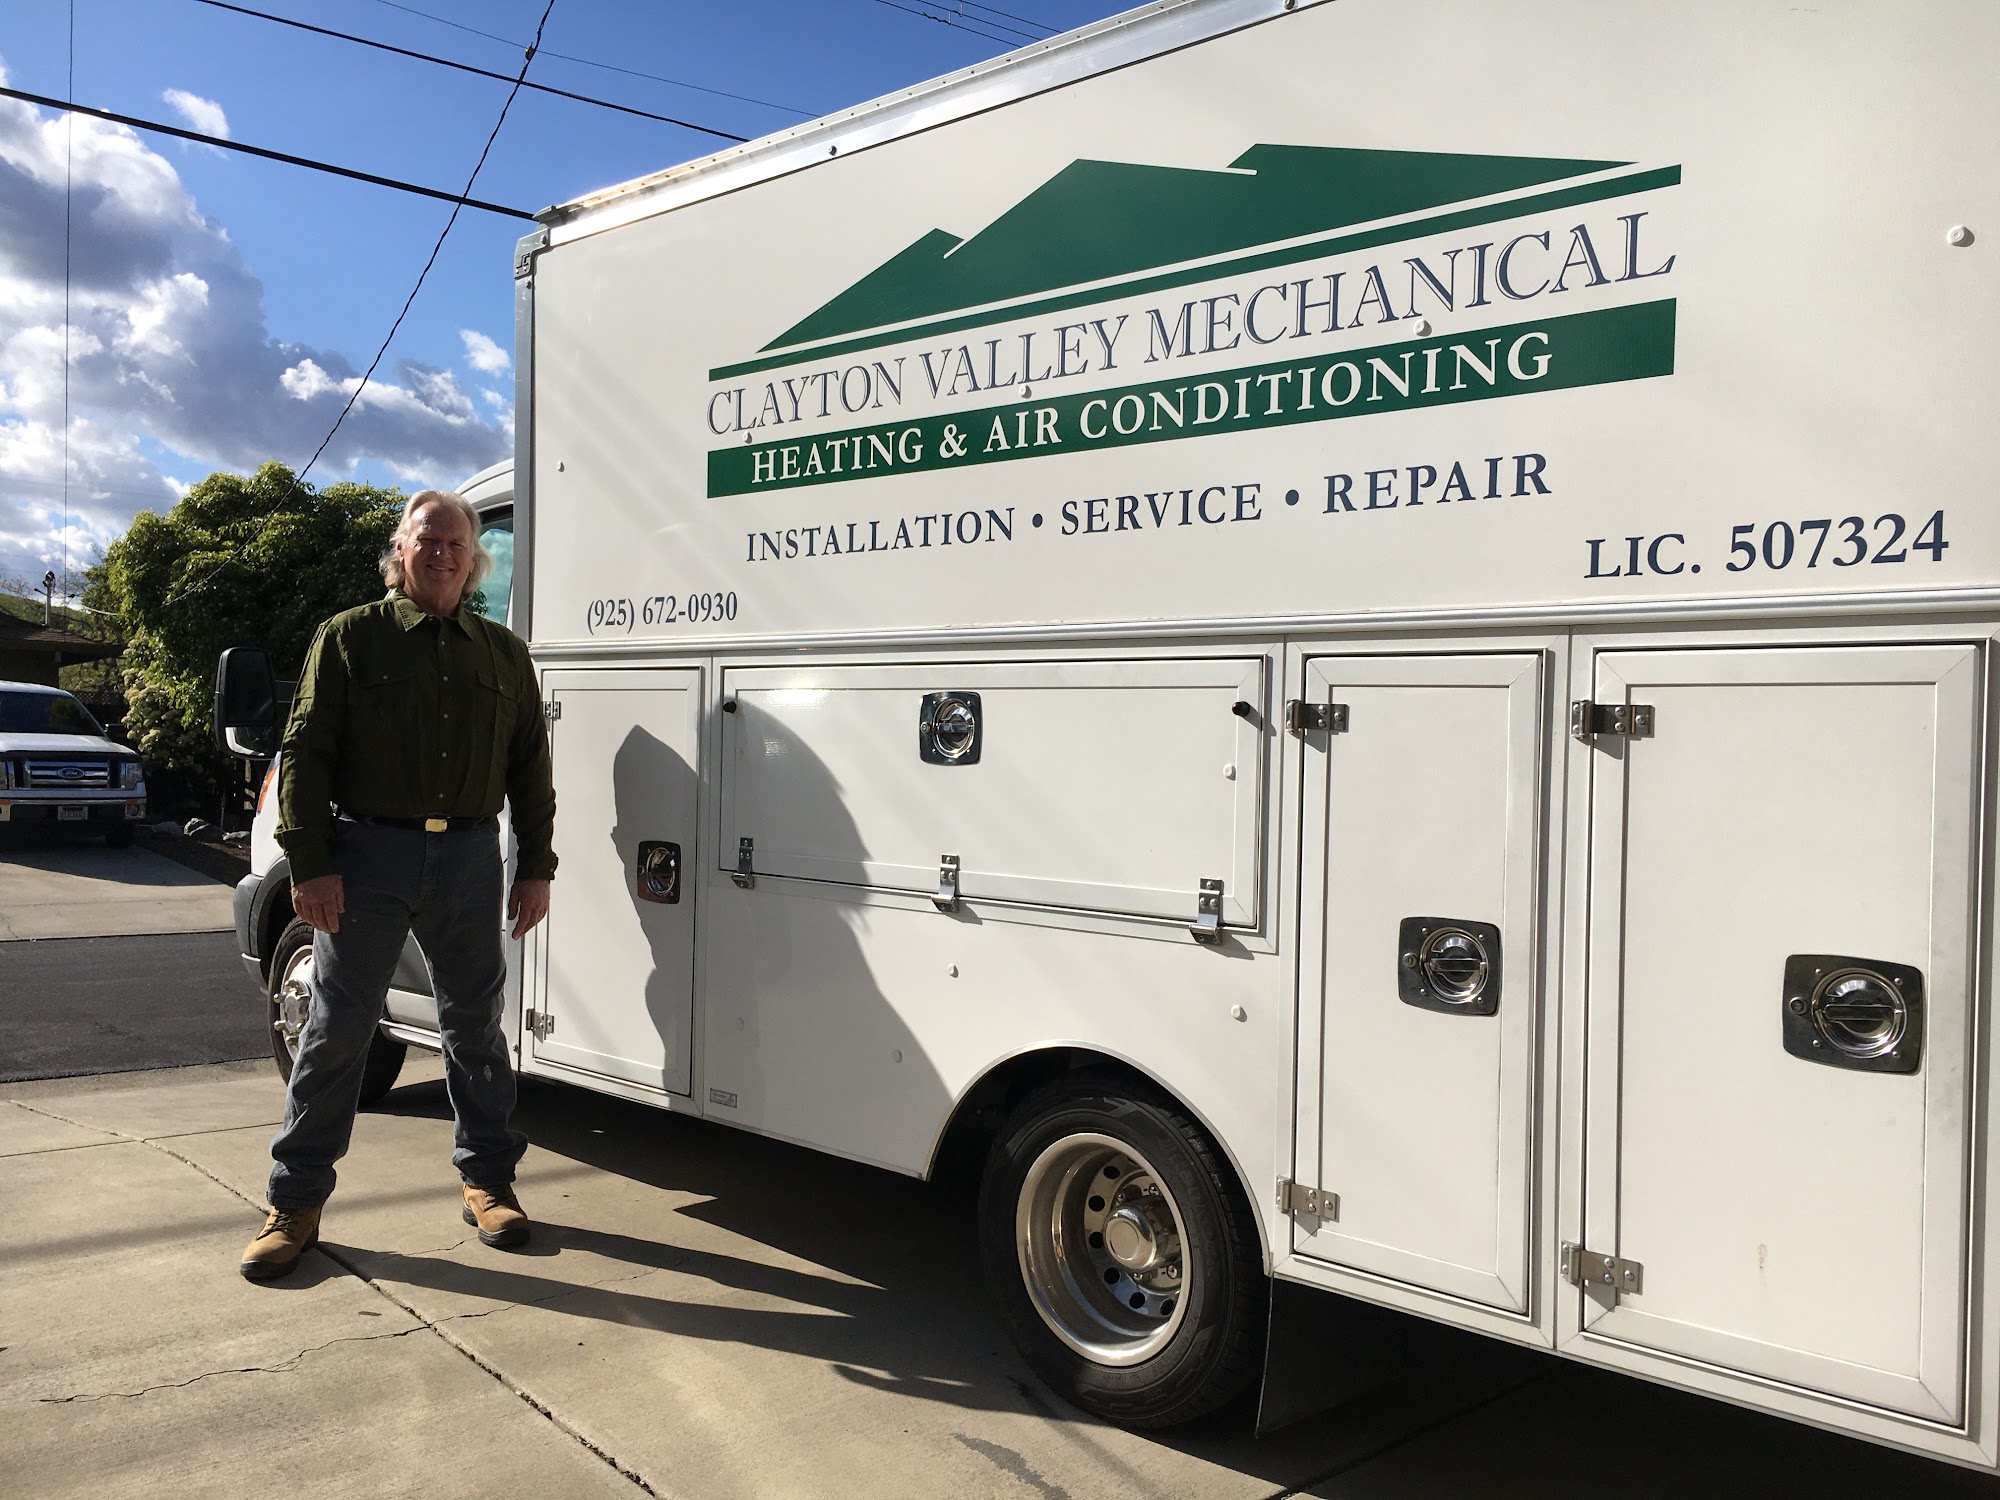 Clayton Valley Mechanical Heating